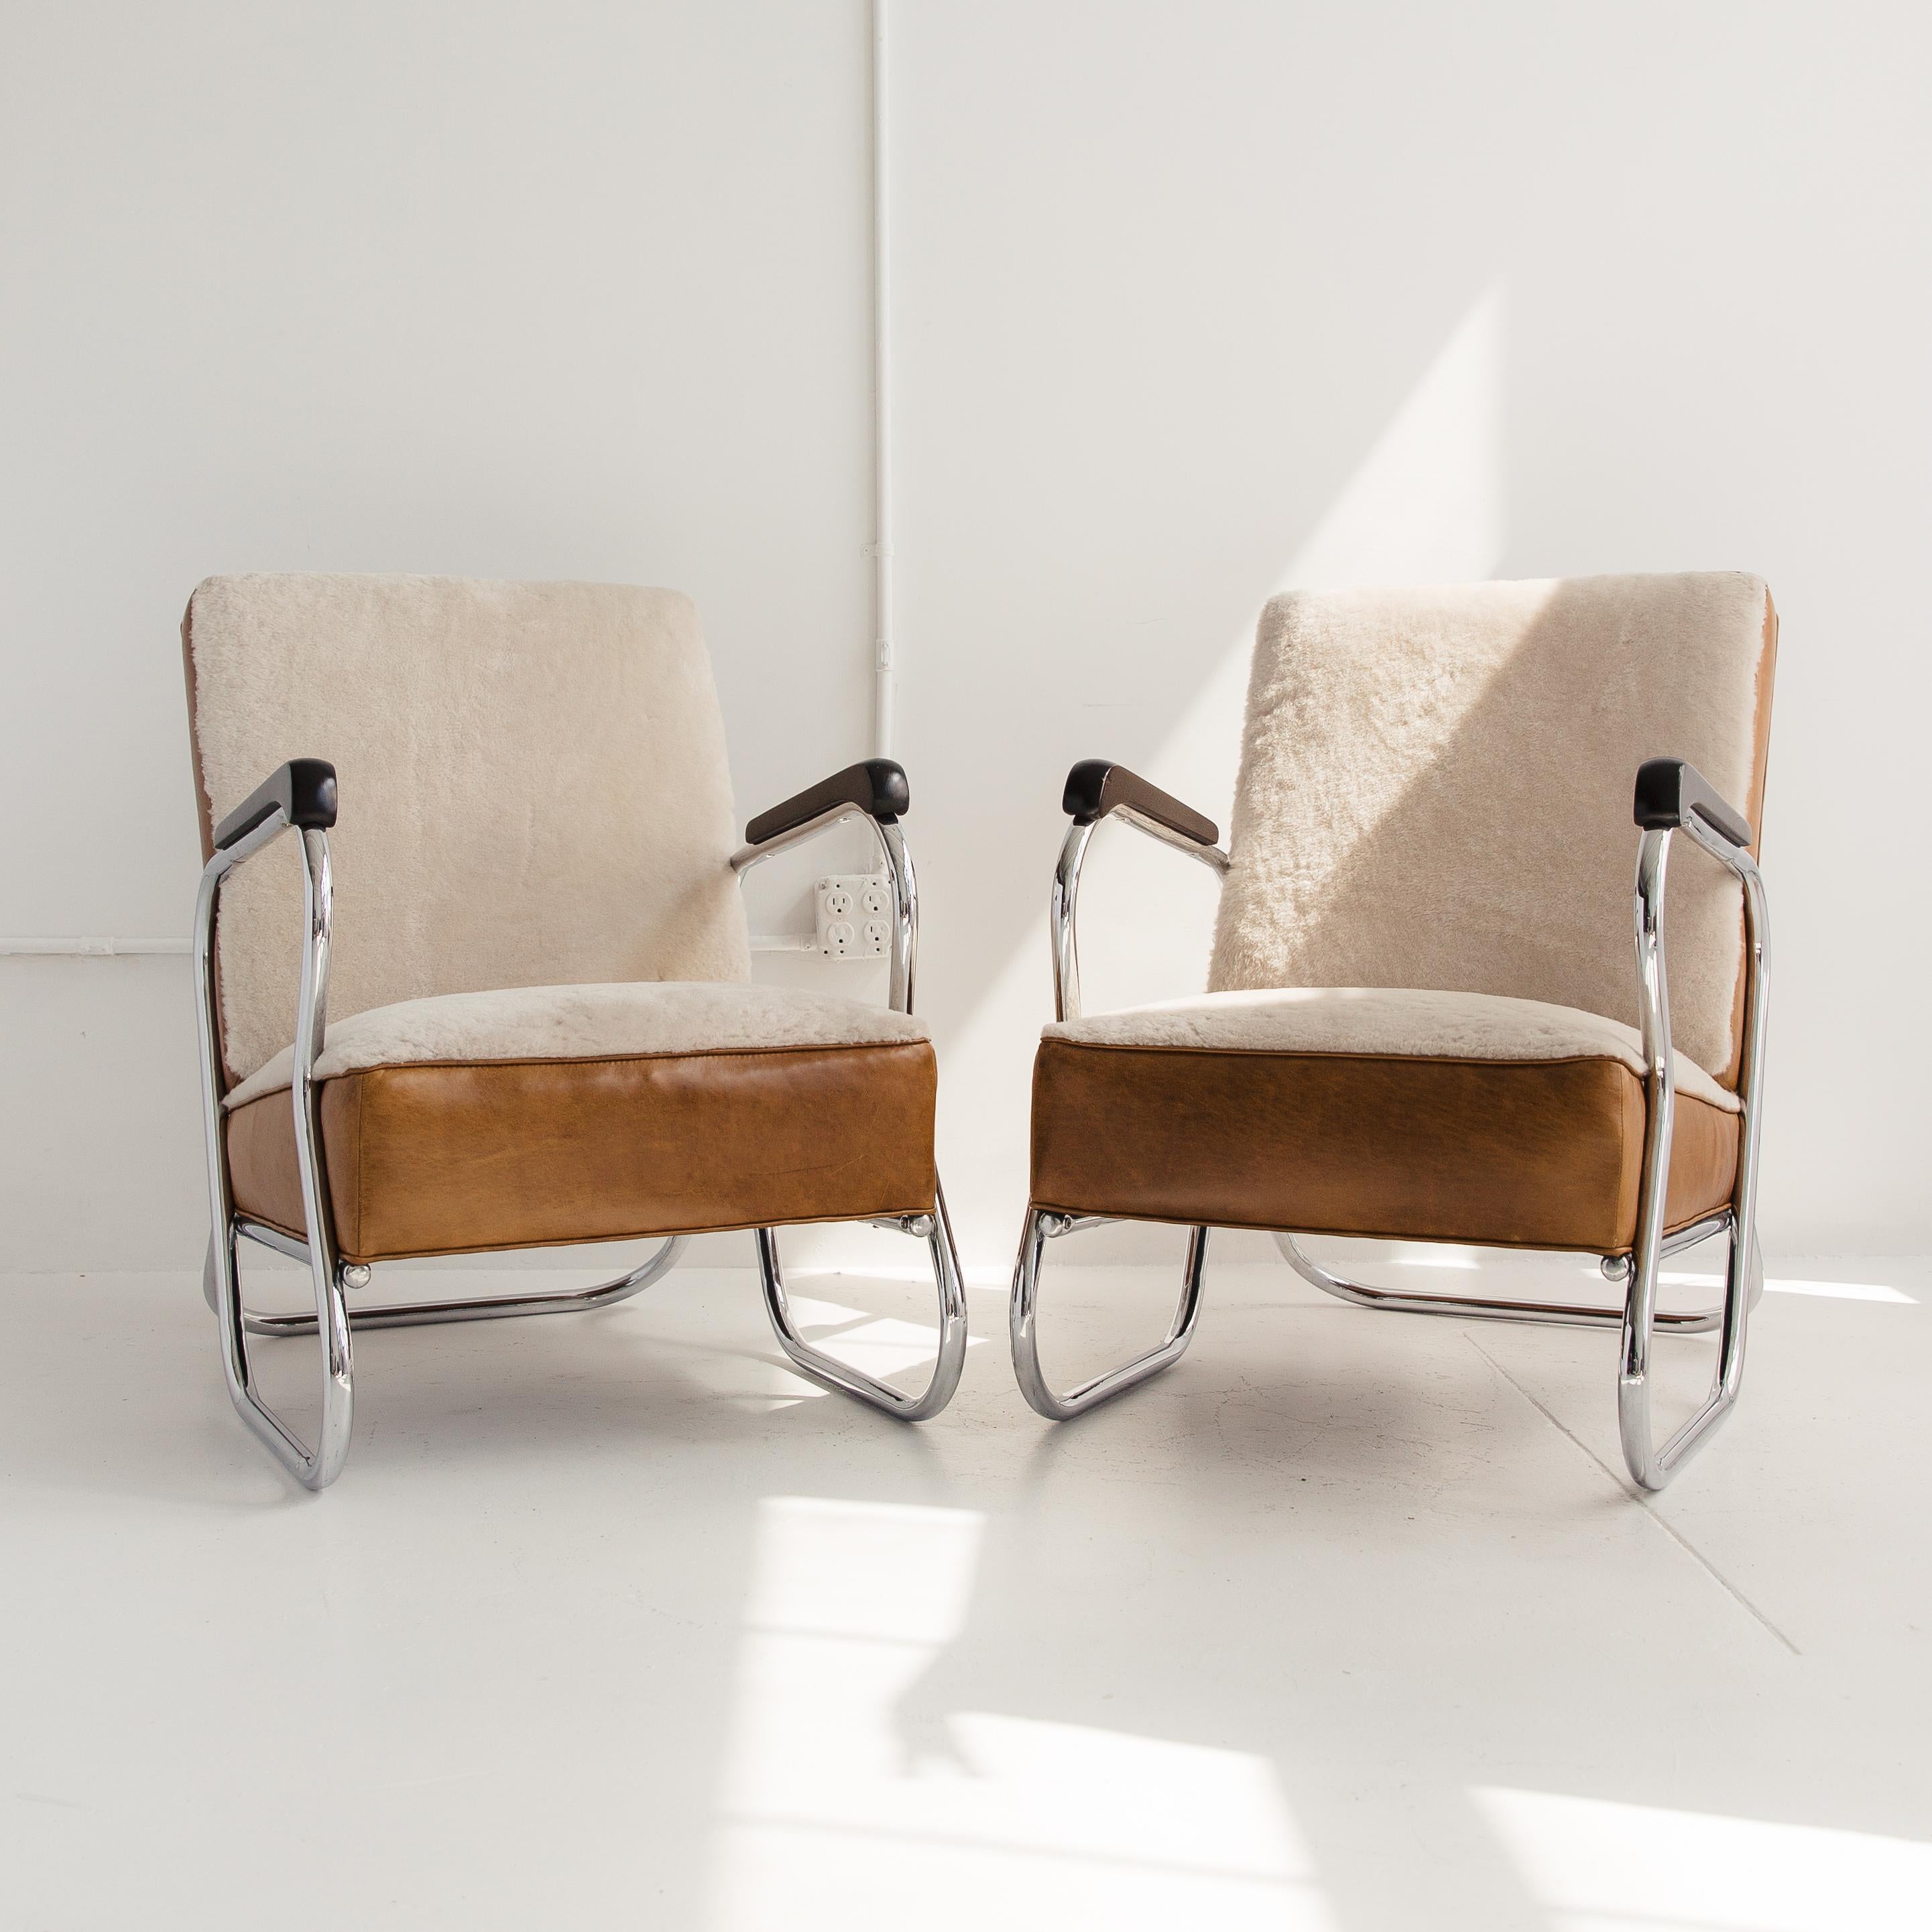 A handsome pair of Art Deco lounge chairs featuring a tubular, polished chrome frame, ebonized wood armrests and an upholstered seat. The chair was recently reupholstered with a white shearling seat and contrasting cognac leather sides. As